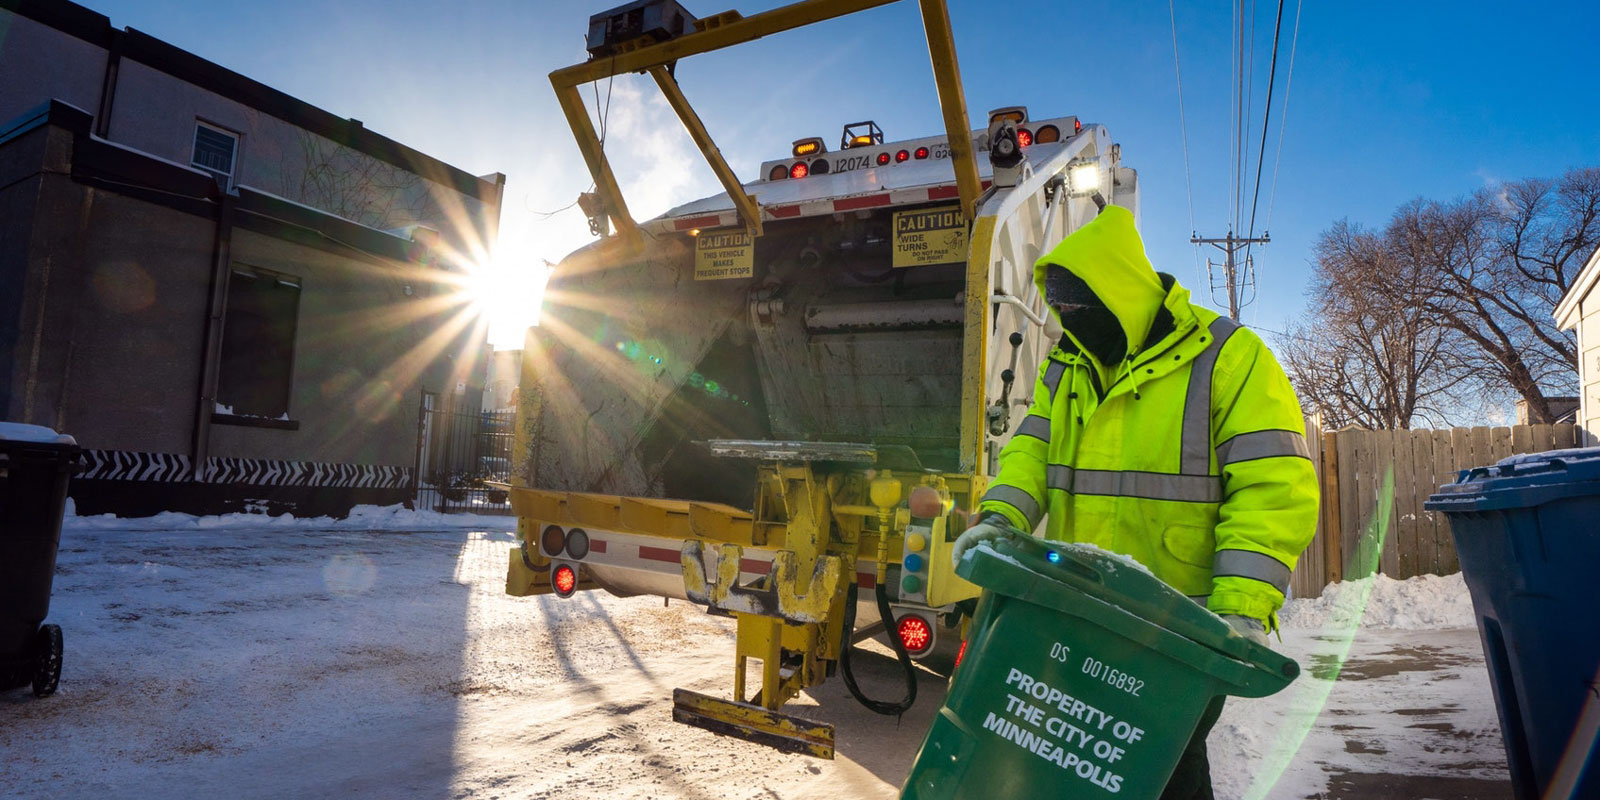 Public works emptying organics container in winter